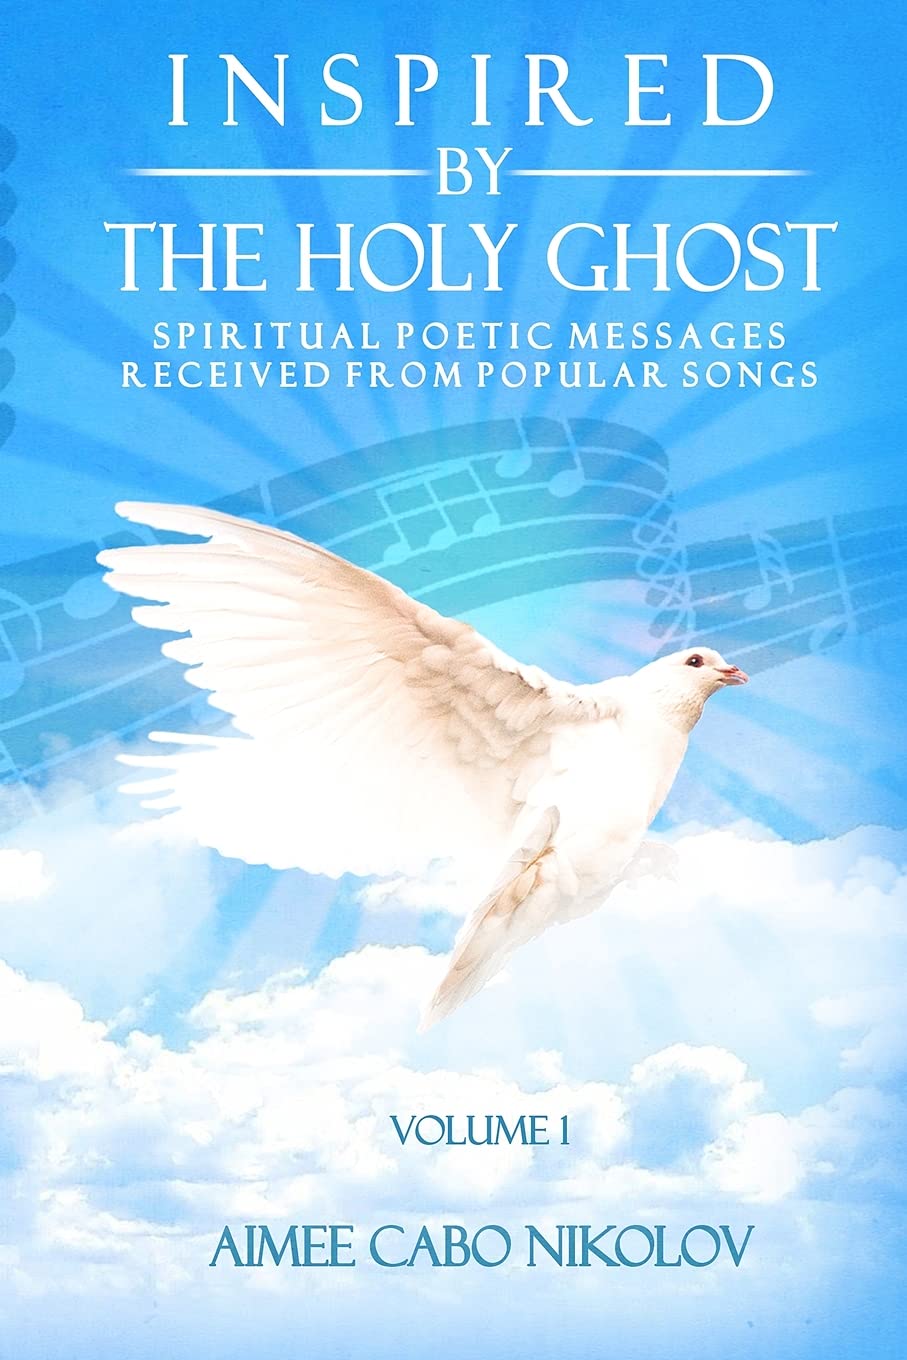 Inspired by the HOLY GHOST Volume 1: Spiritual Poetic Messages Received from Popular Songs